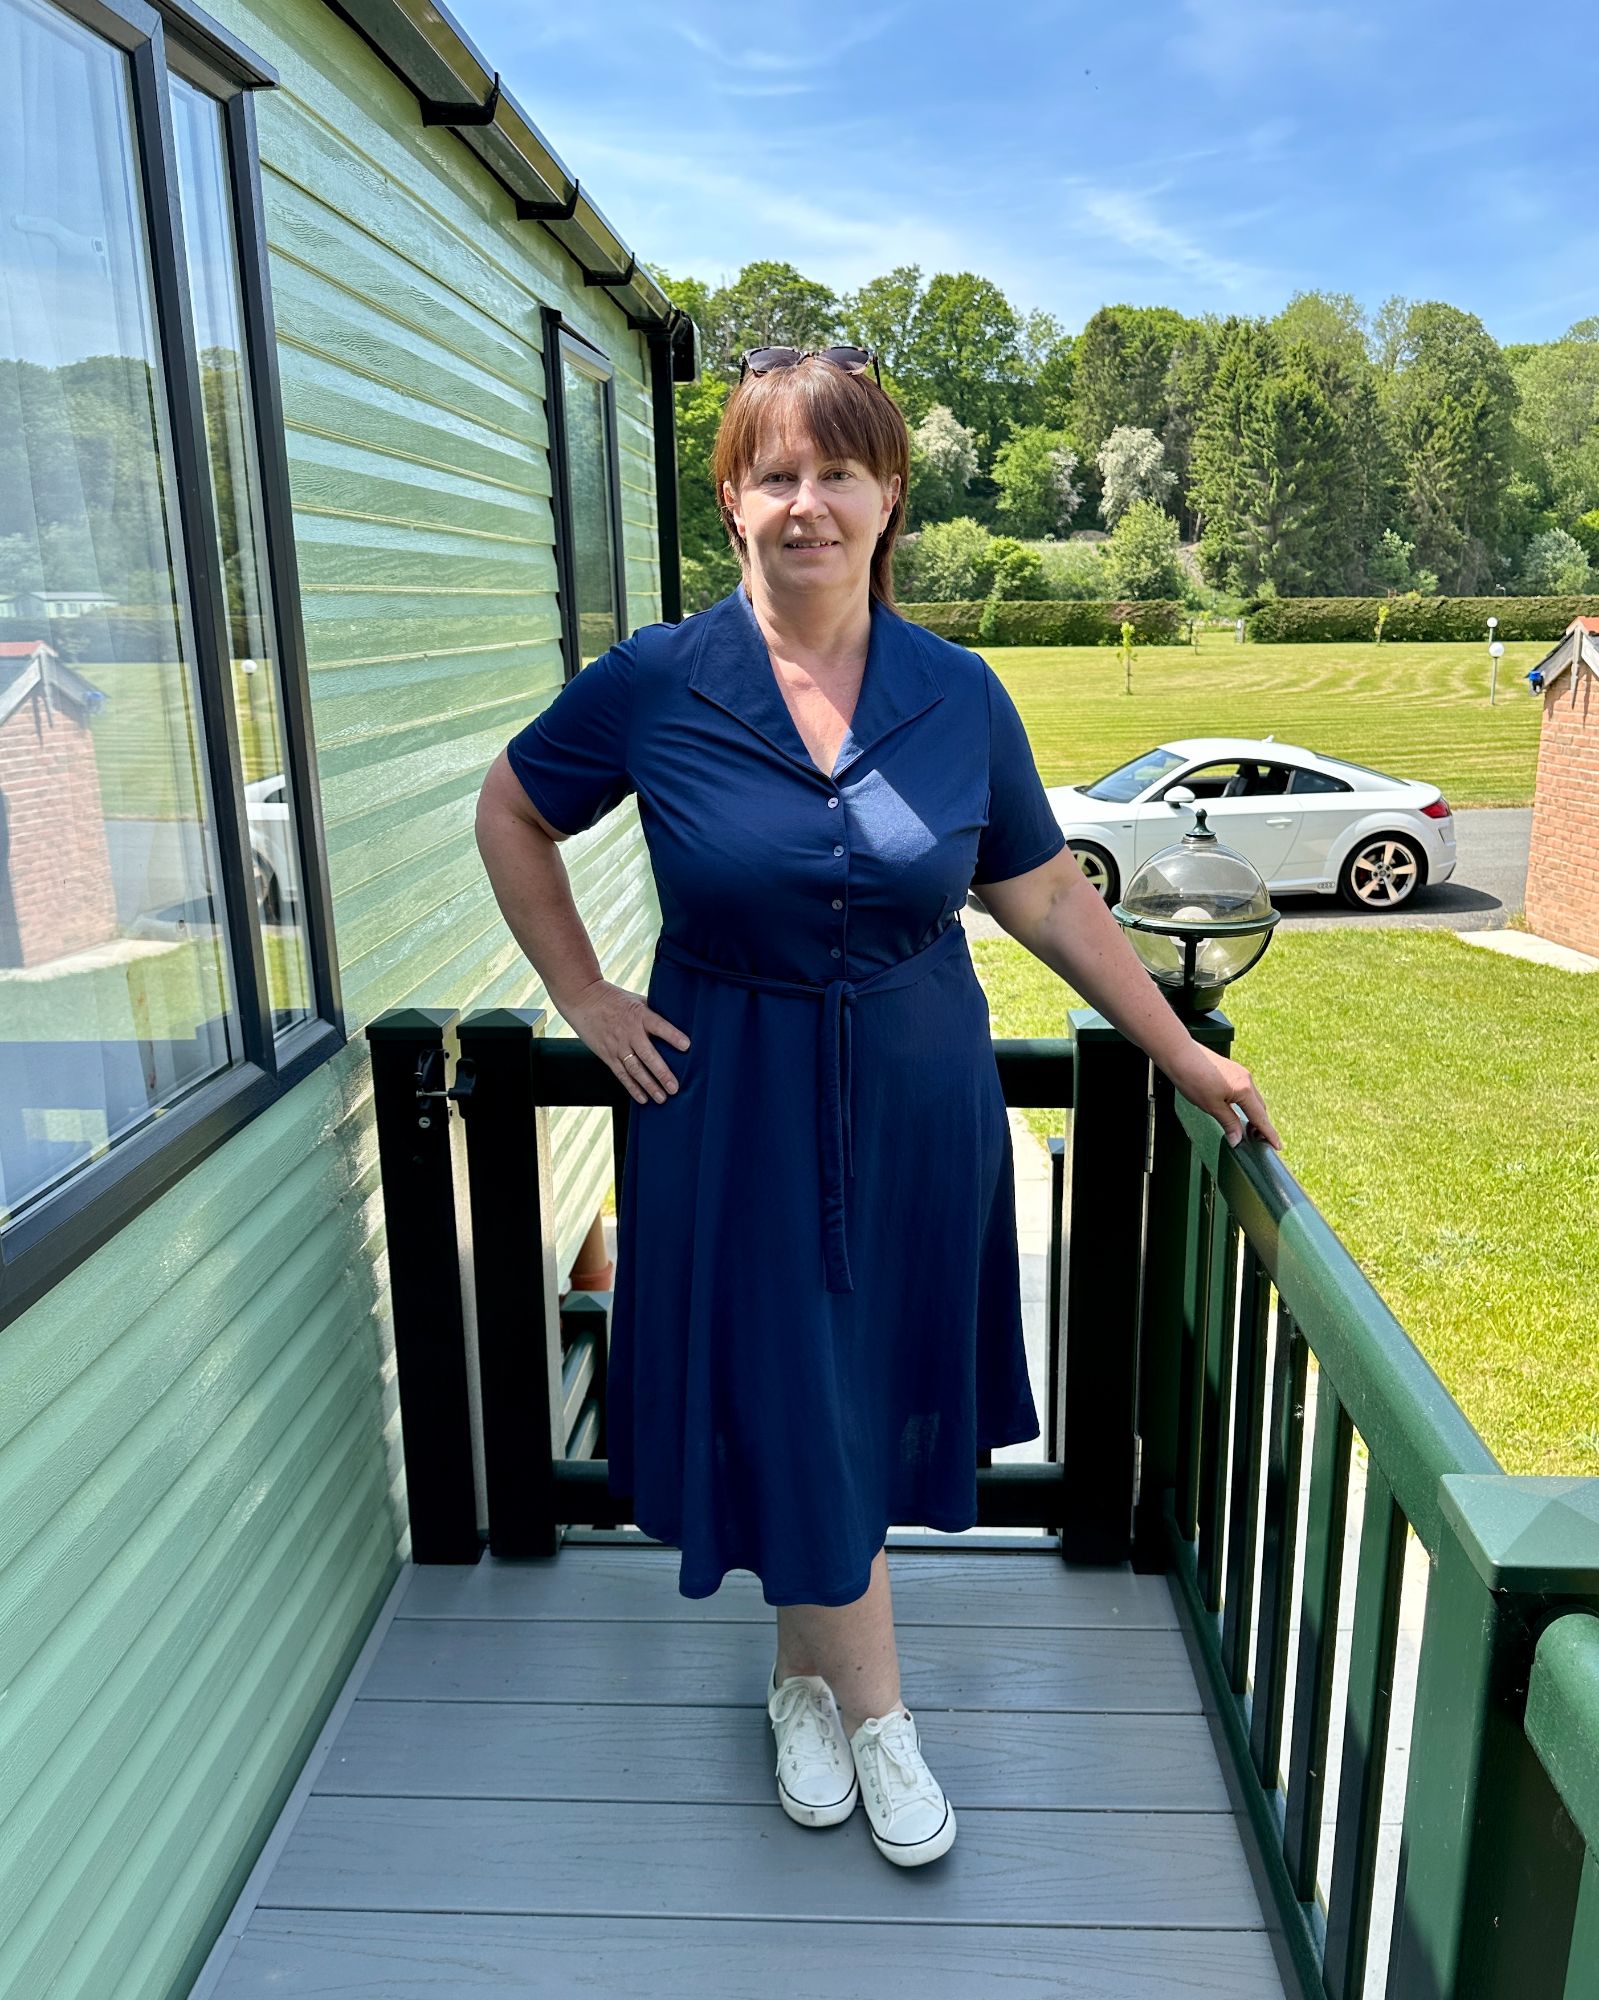 A lady with short brown hair standing on a caravan decking wearing a navy jersey dress.